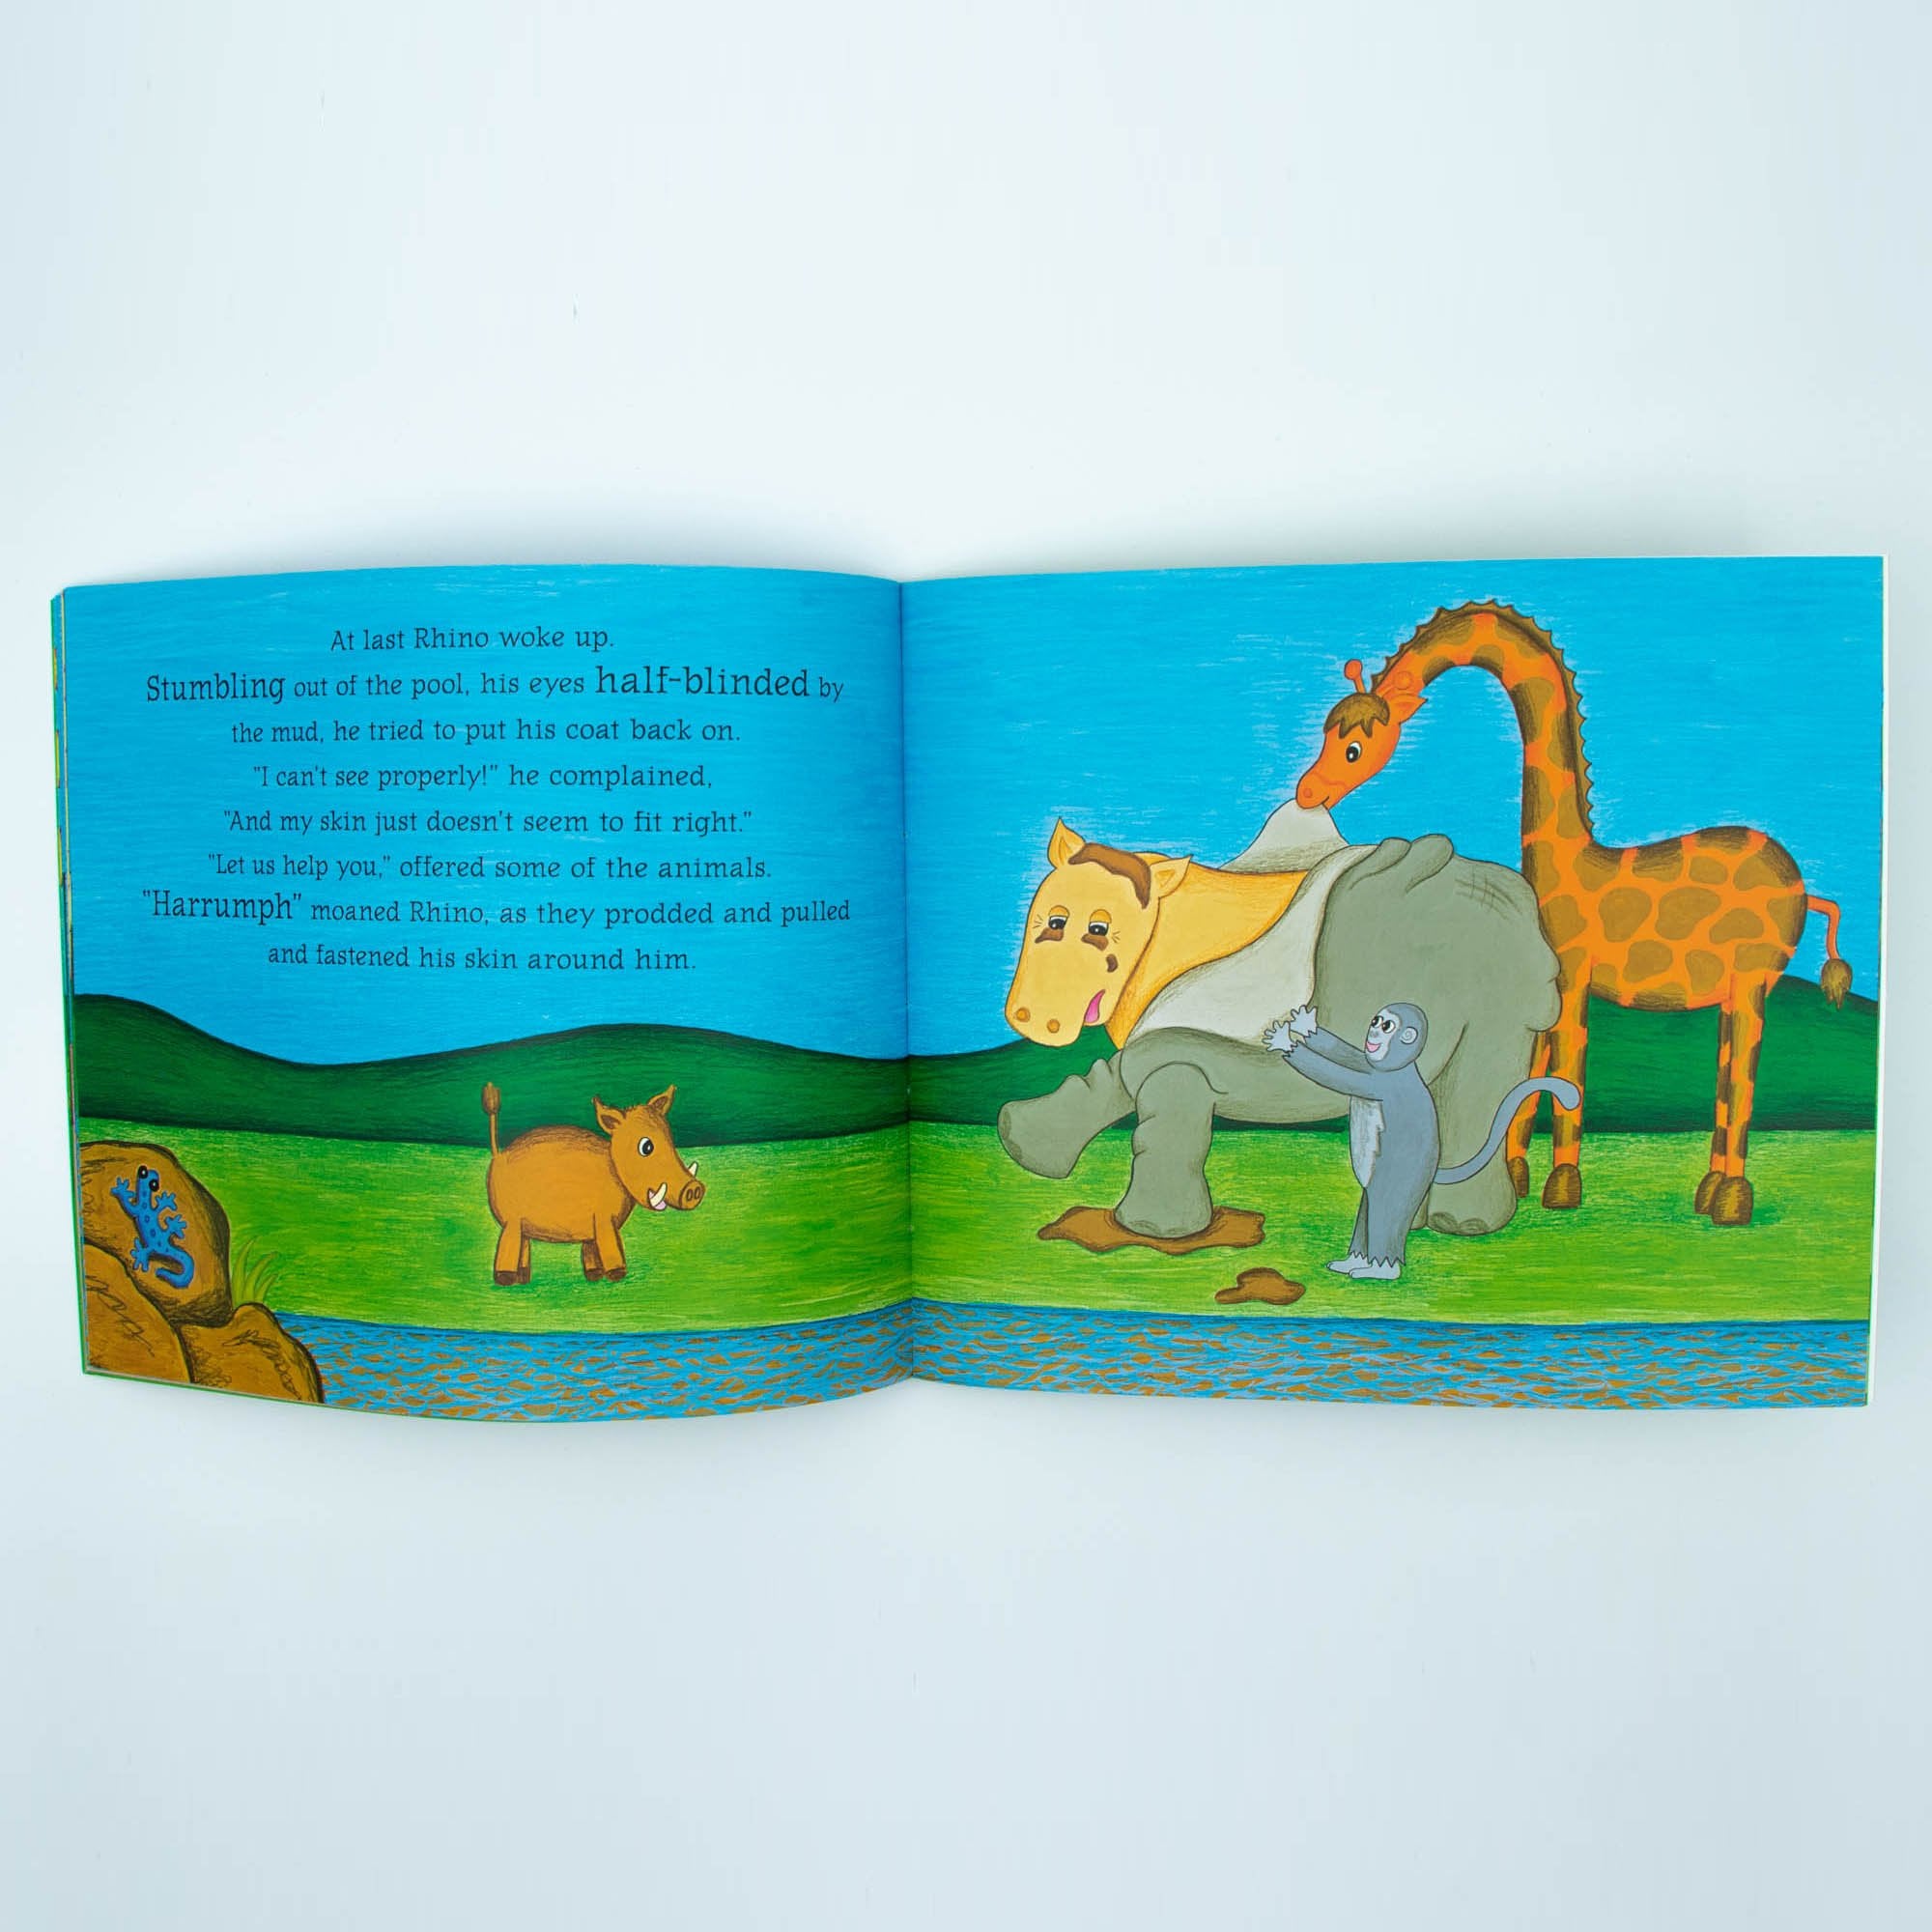 African Folklore Stories How Rhino got his Baggy Skin English Story Book